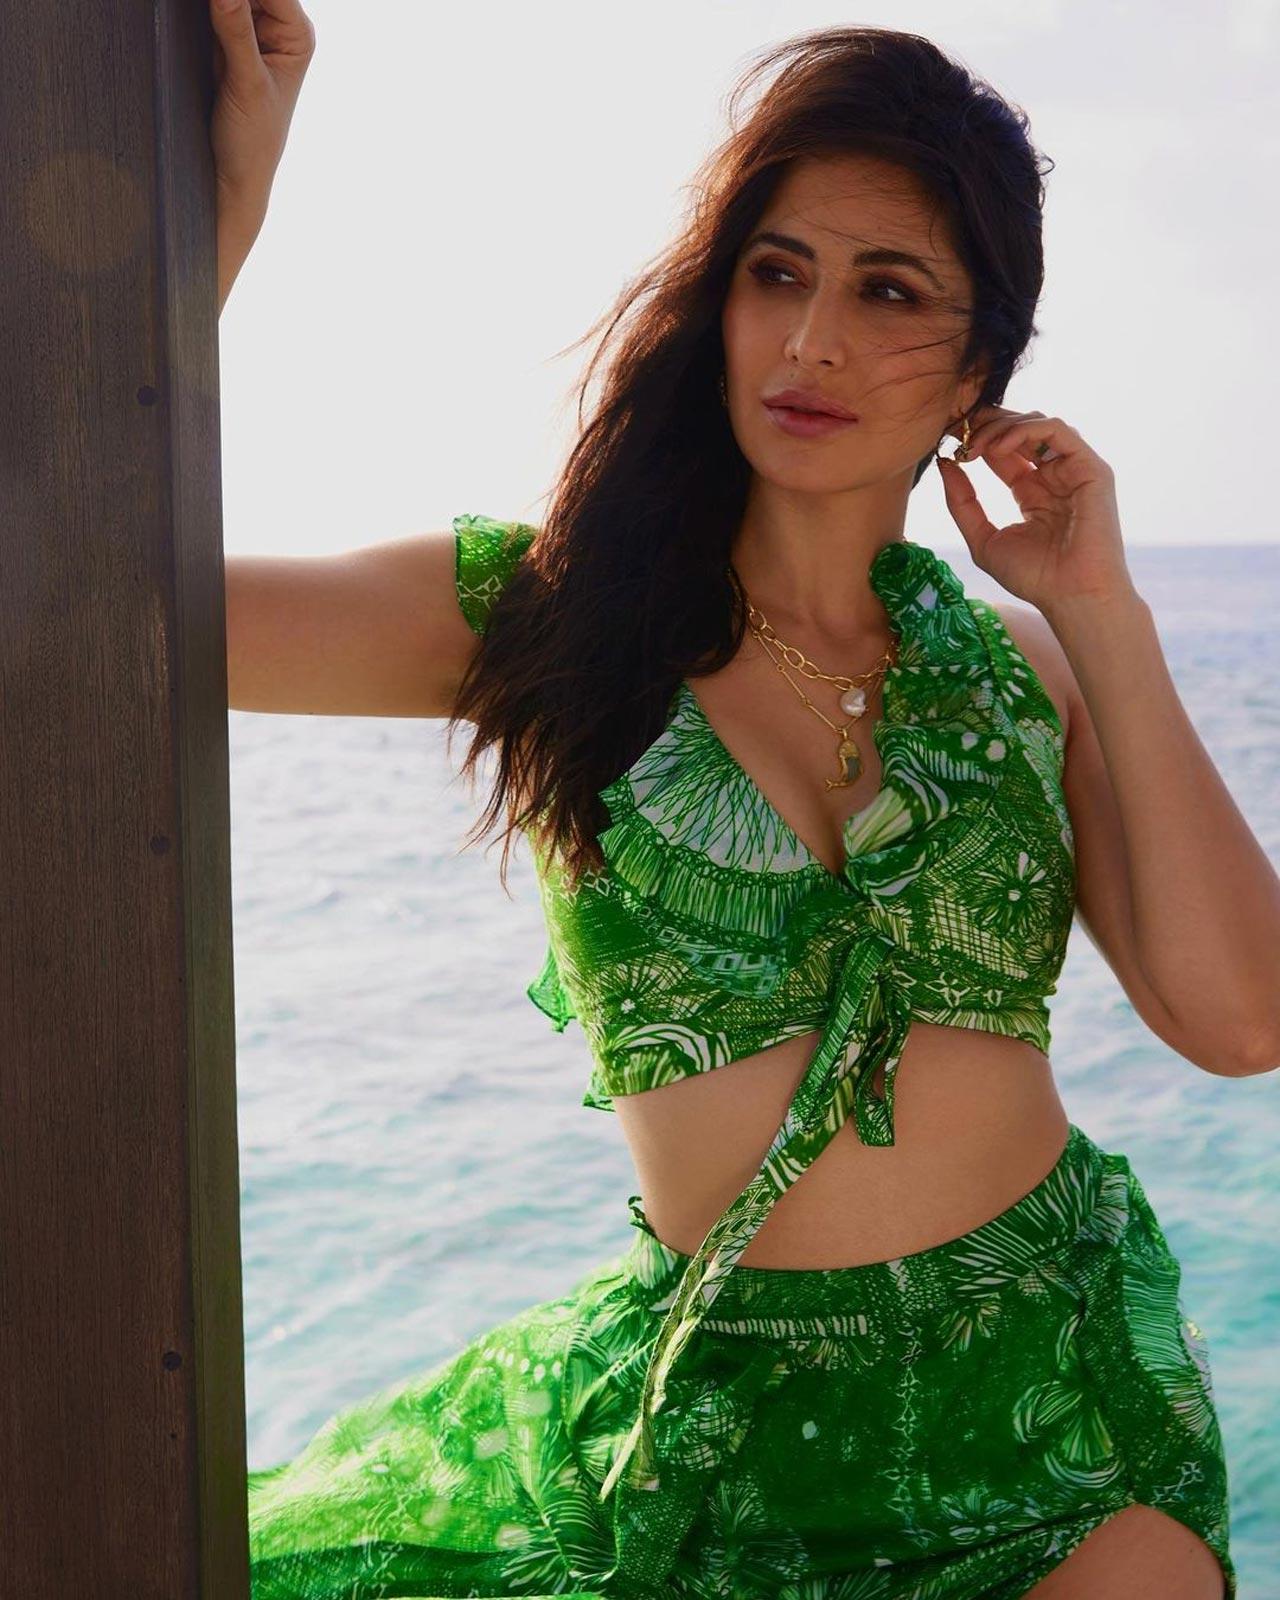 Katrina Kaif
Her green floral skirtini beachwear with a slit skirt is a sight to lust over. The trend-setting queen of the big screen has been killing roles and looks constantly and we give an absolute thumbs up to this cute yet chic outfit. It reminds us of a sunny day by the pool in Goa.